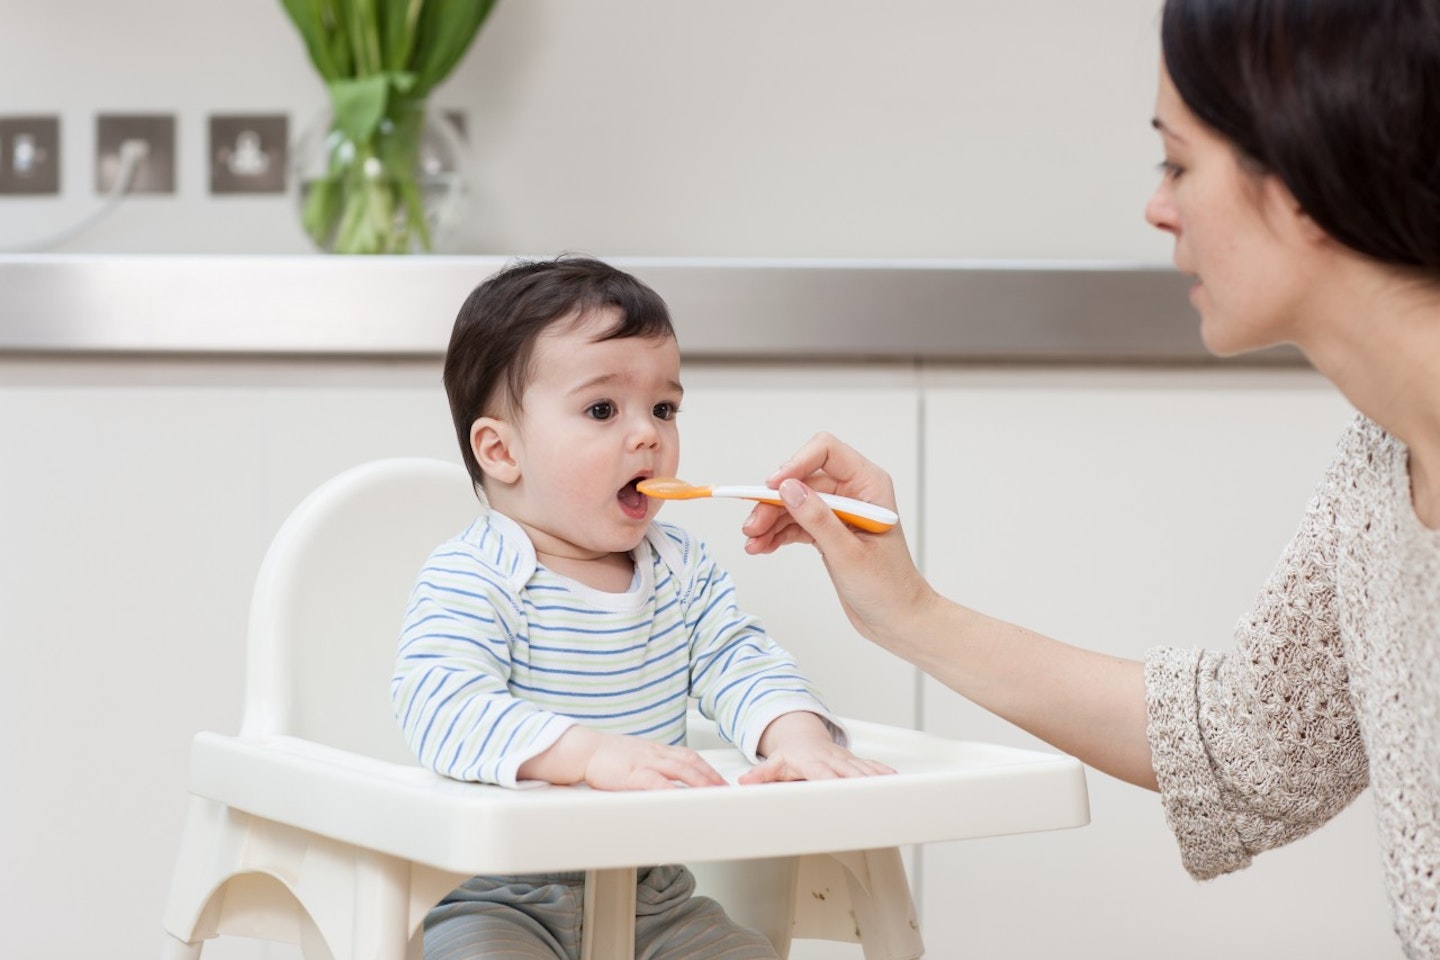 6 Foods Your Baby Needs To Eat This Winter